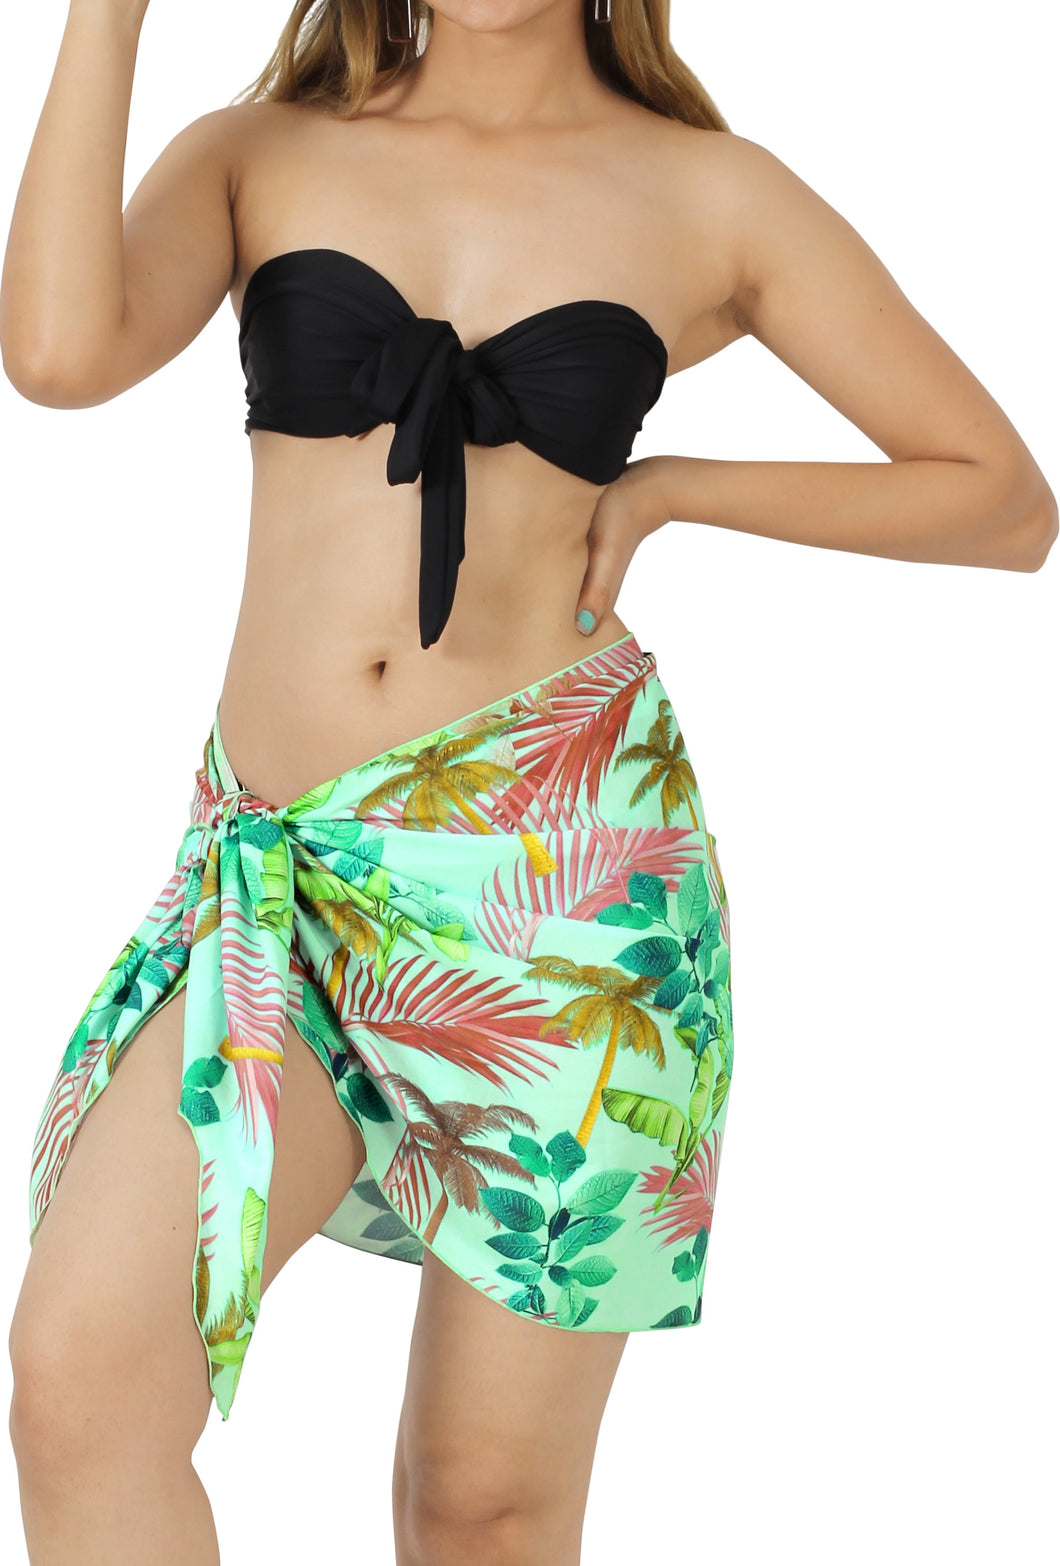 Seaside Serenity Non-Sheer Palm Tree and Leaves Print Half Beach Wrap For Women